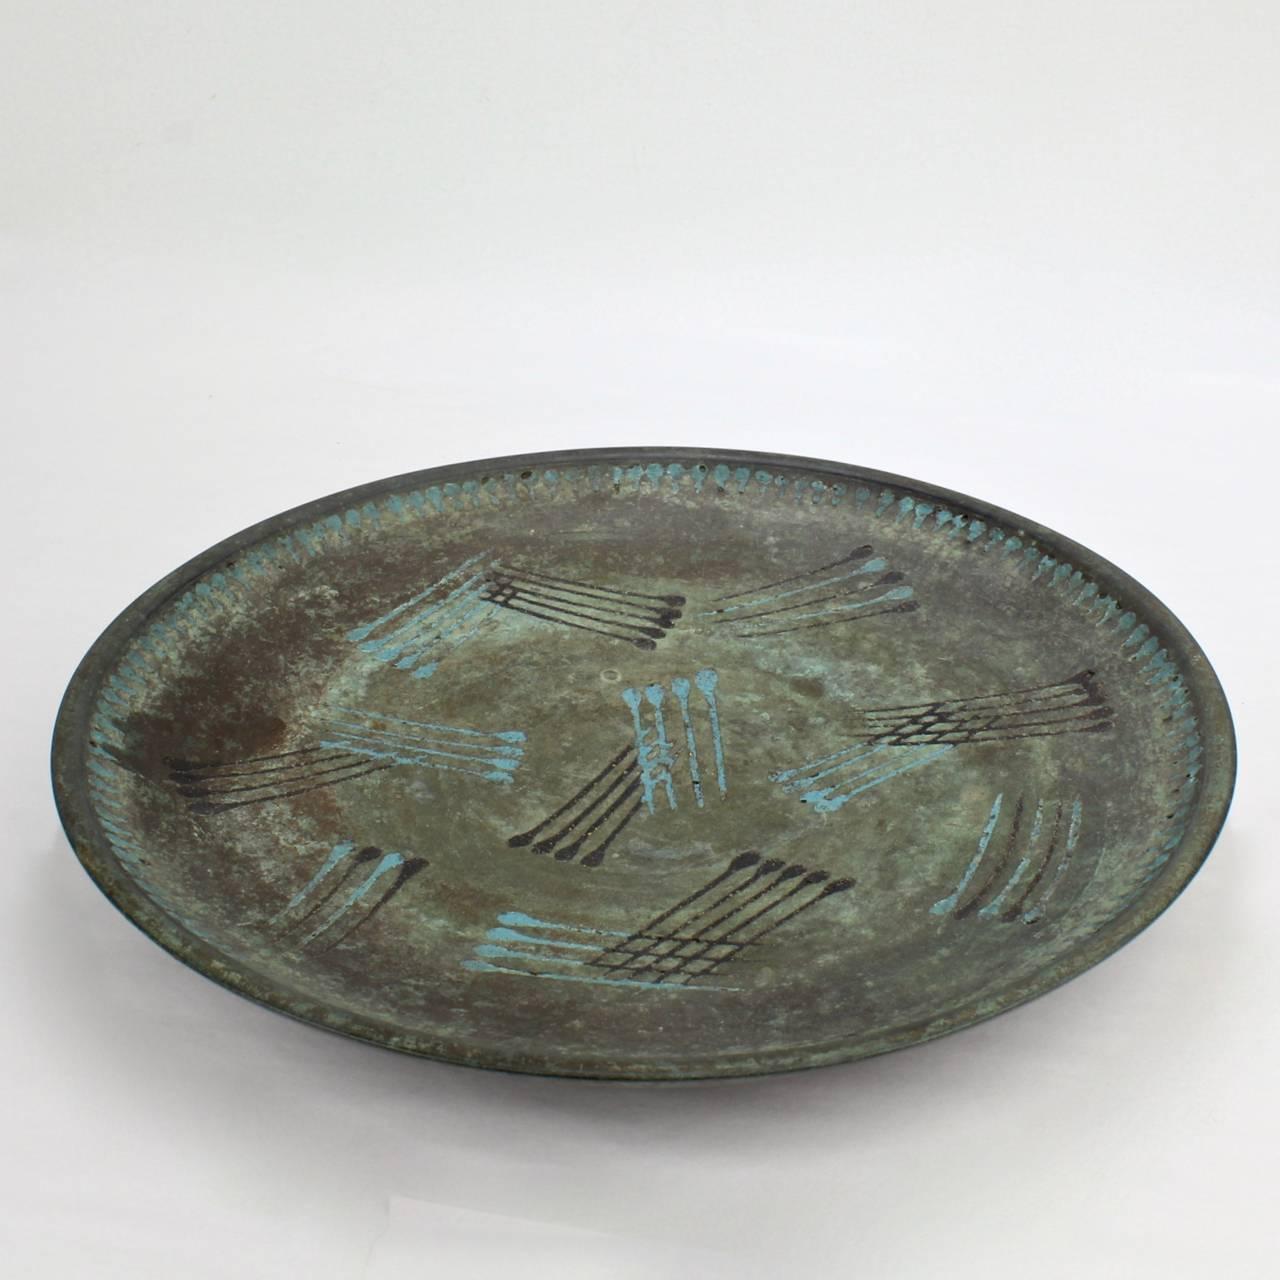 A good Primavera HM Art Deco period plat circulaire.

The round bronze plate has turquoise and black enamel champlevé decoration and a mottled verdigris patina.

The reverse has a Primavera HM mark in relief.

Diameter: circa 10 3/8